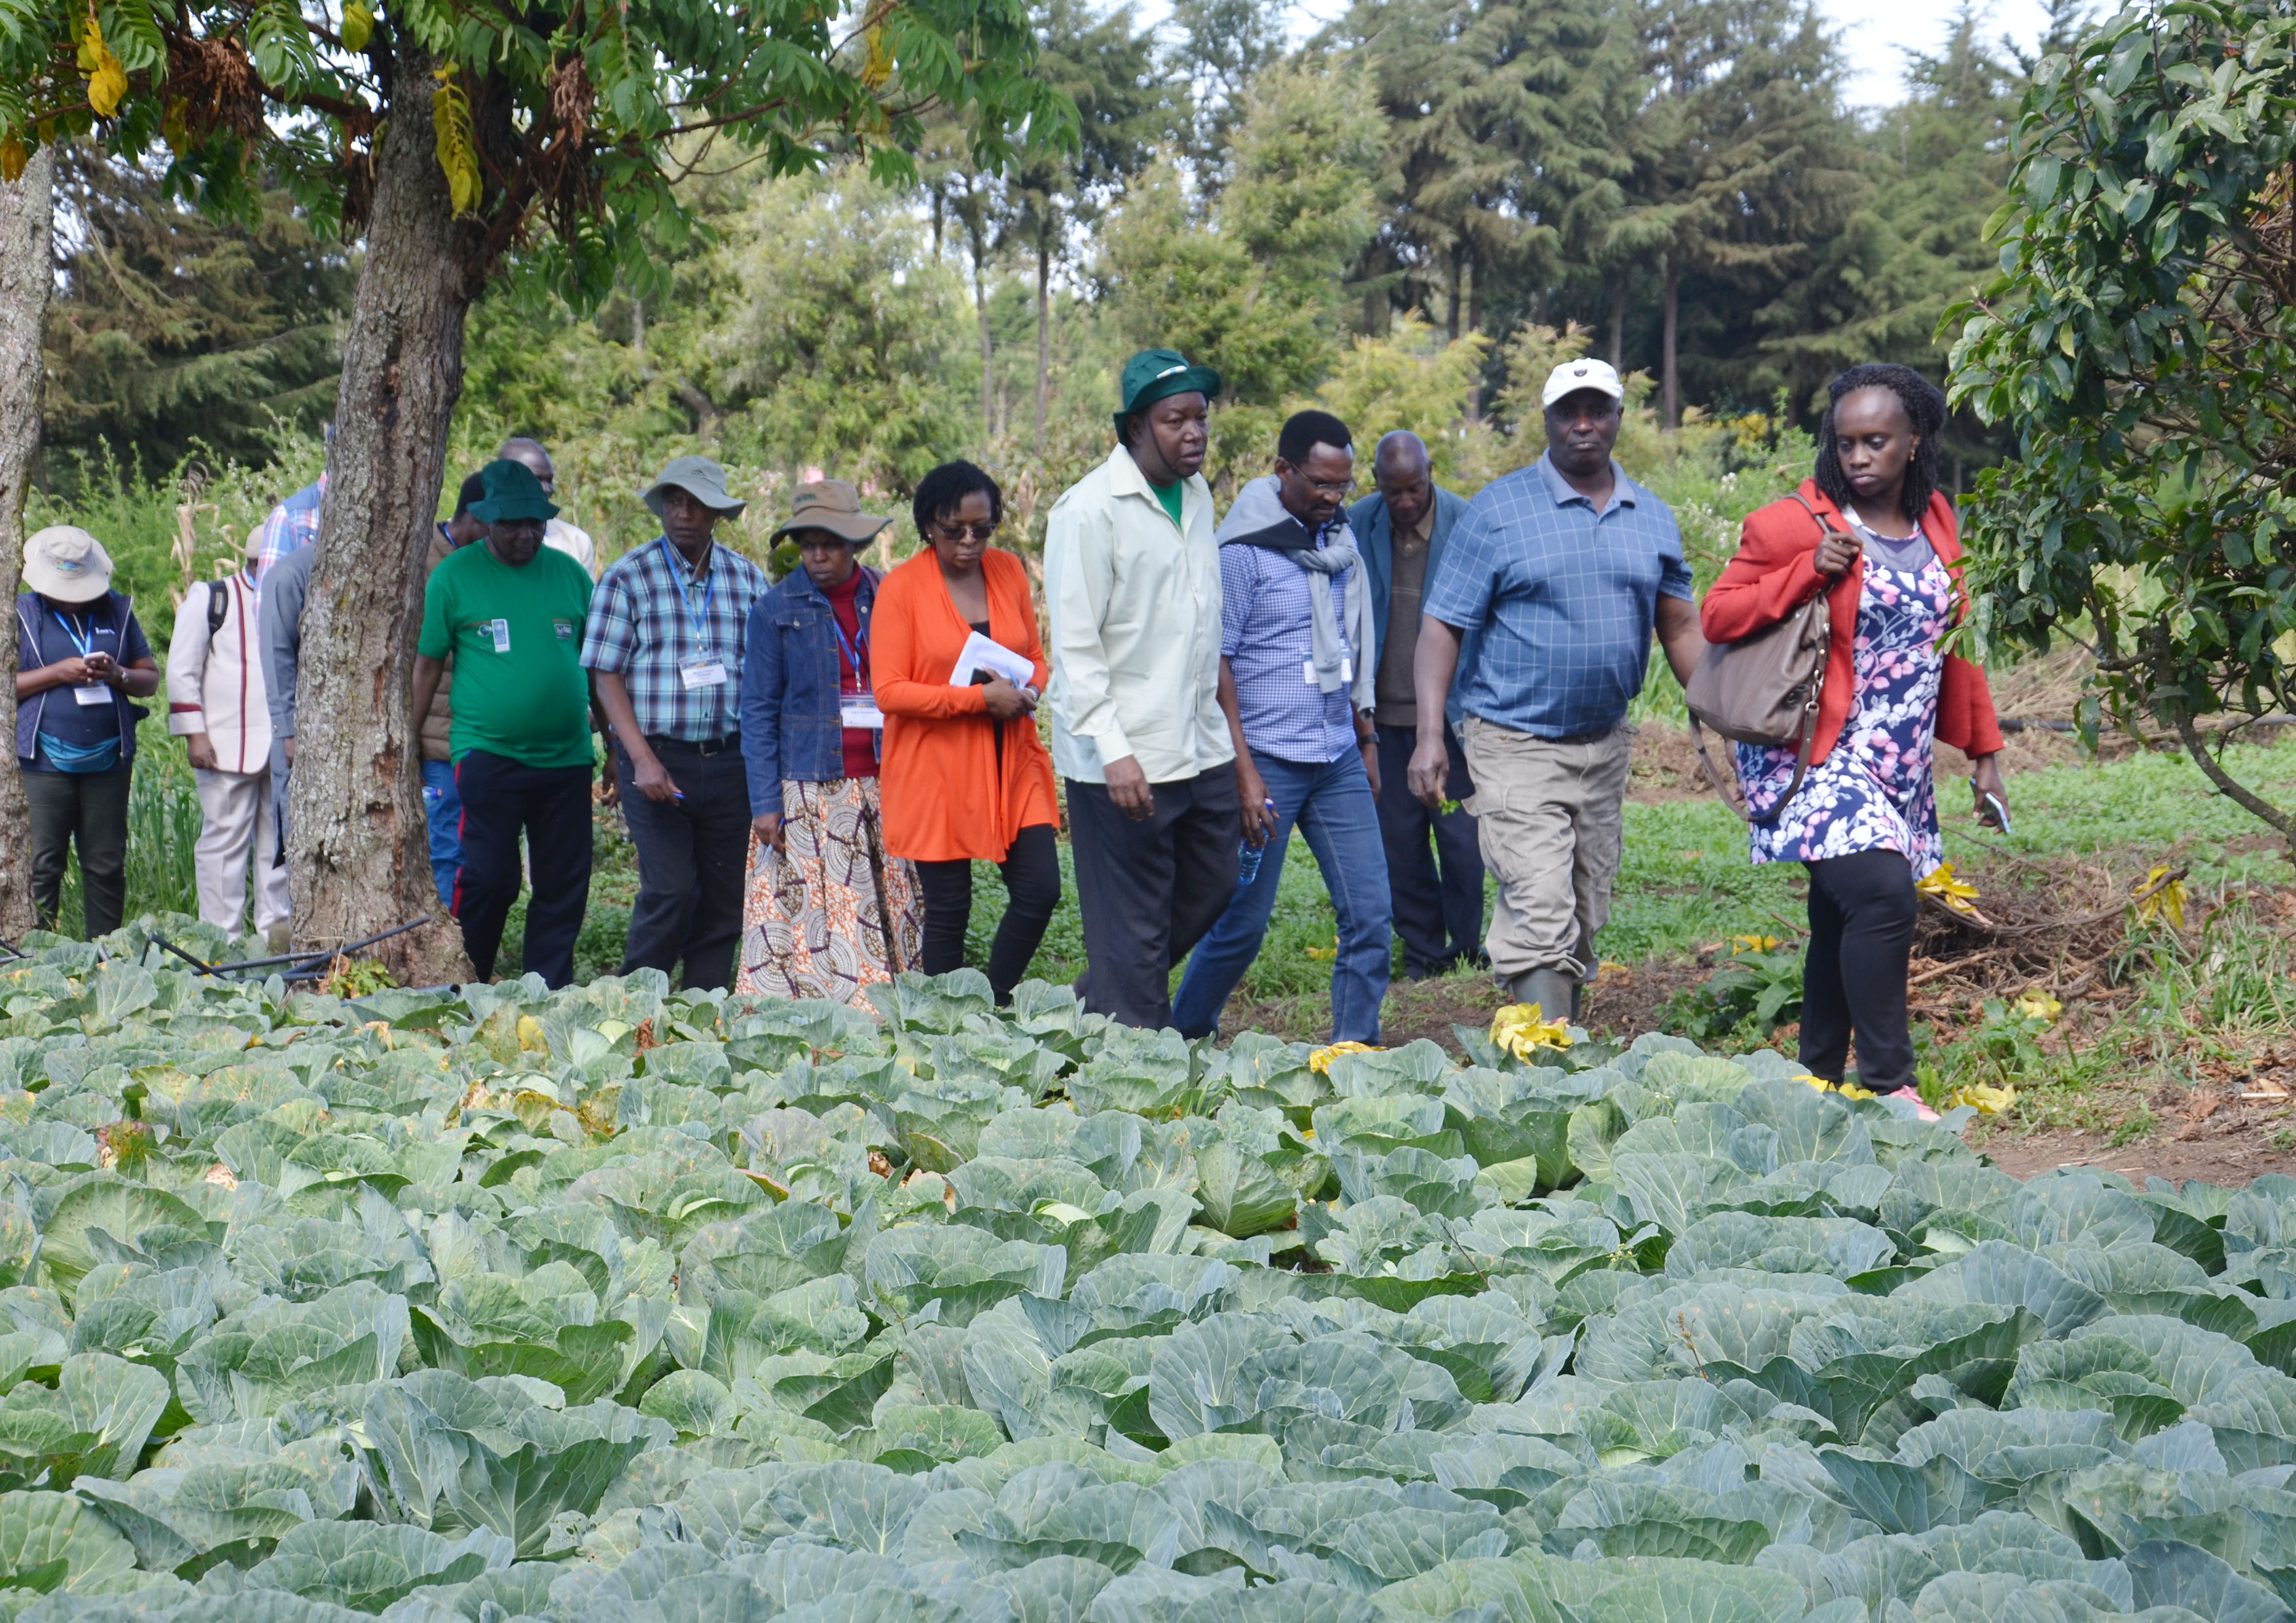 Workshop participants checking out Stephen Machari’s cabbage farming. He now produces 14 000 heads of cabbage per acre of land with help from the UTNWF activities, an improvement of 55-95% from before. (Credit: ICRAF)